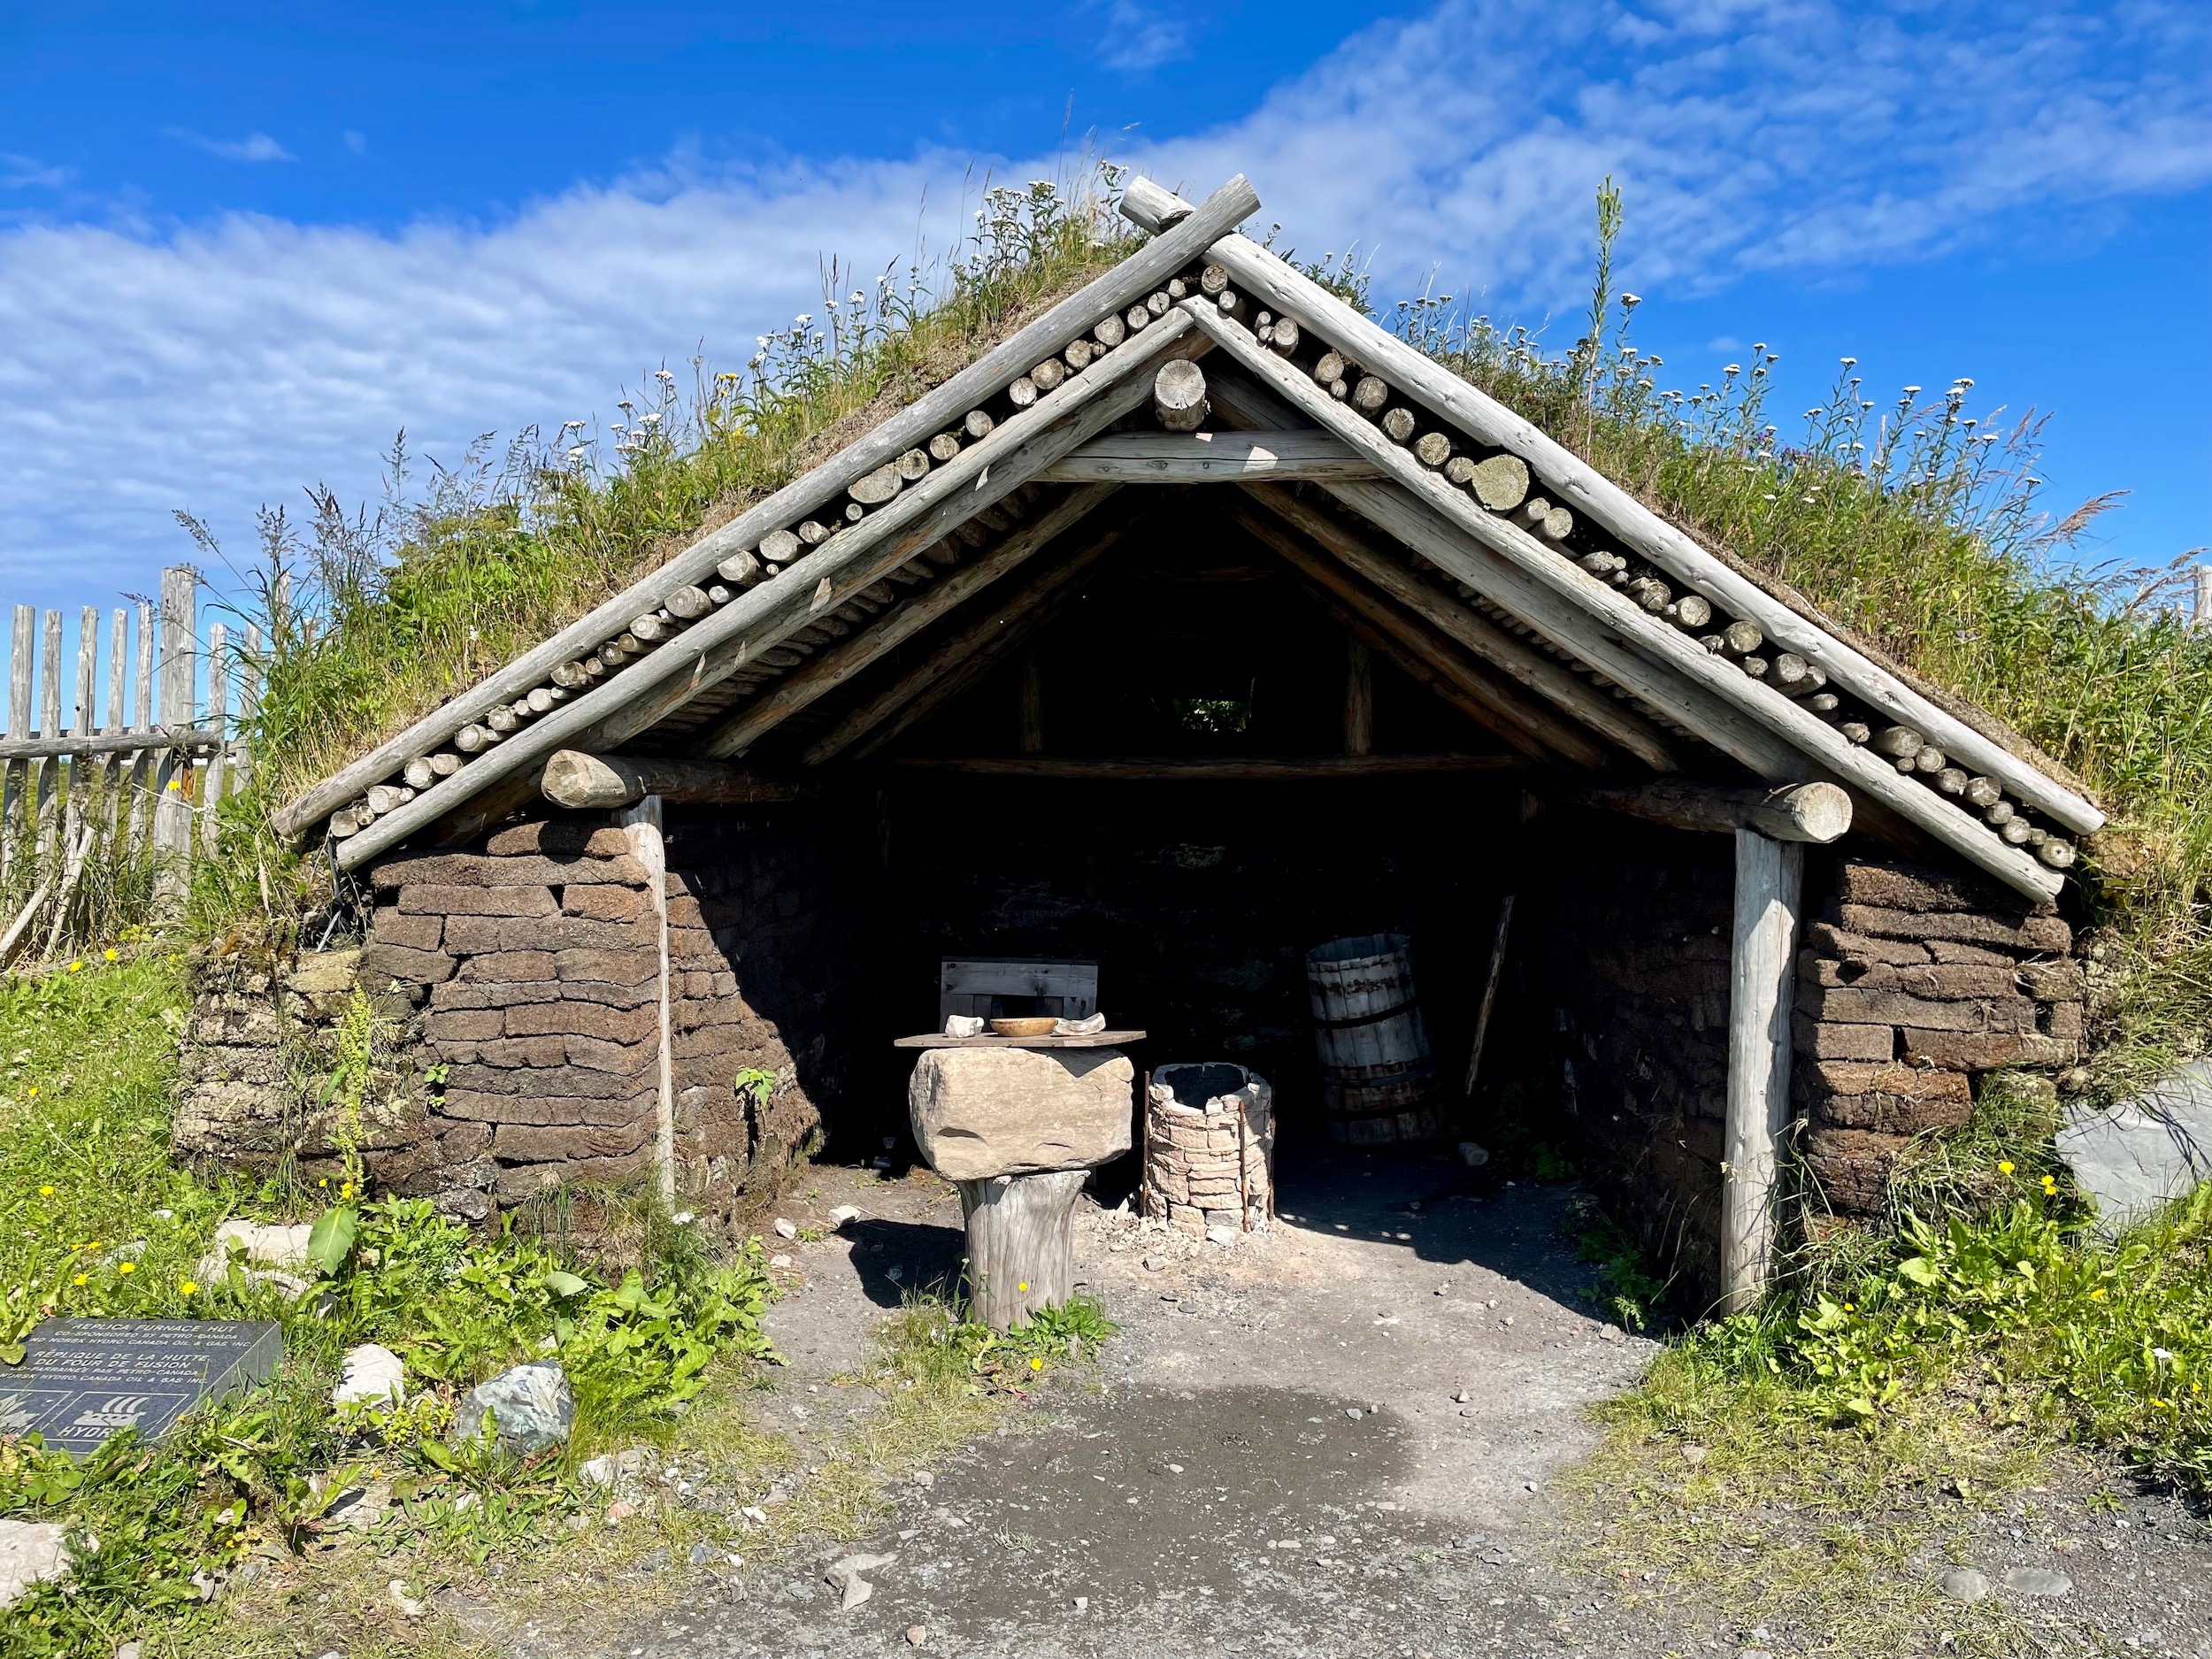 Forge at L'Anse aux Meadows